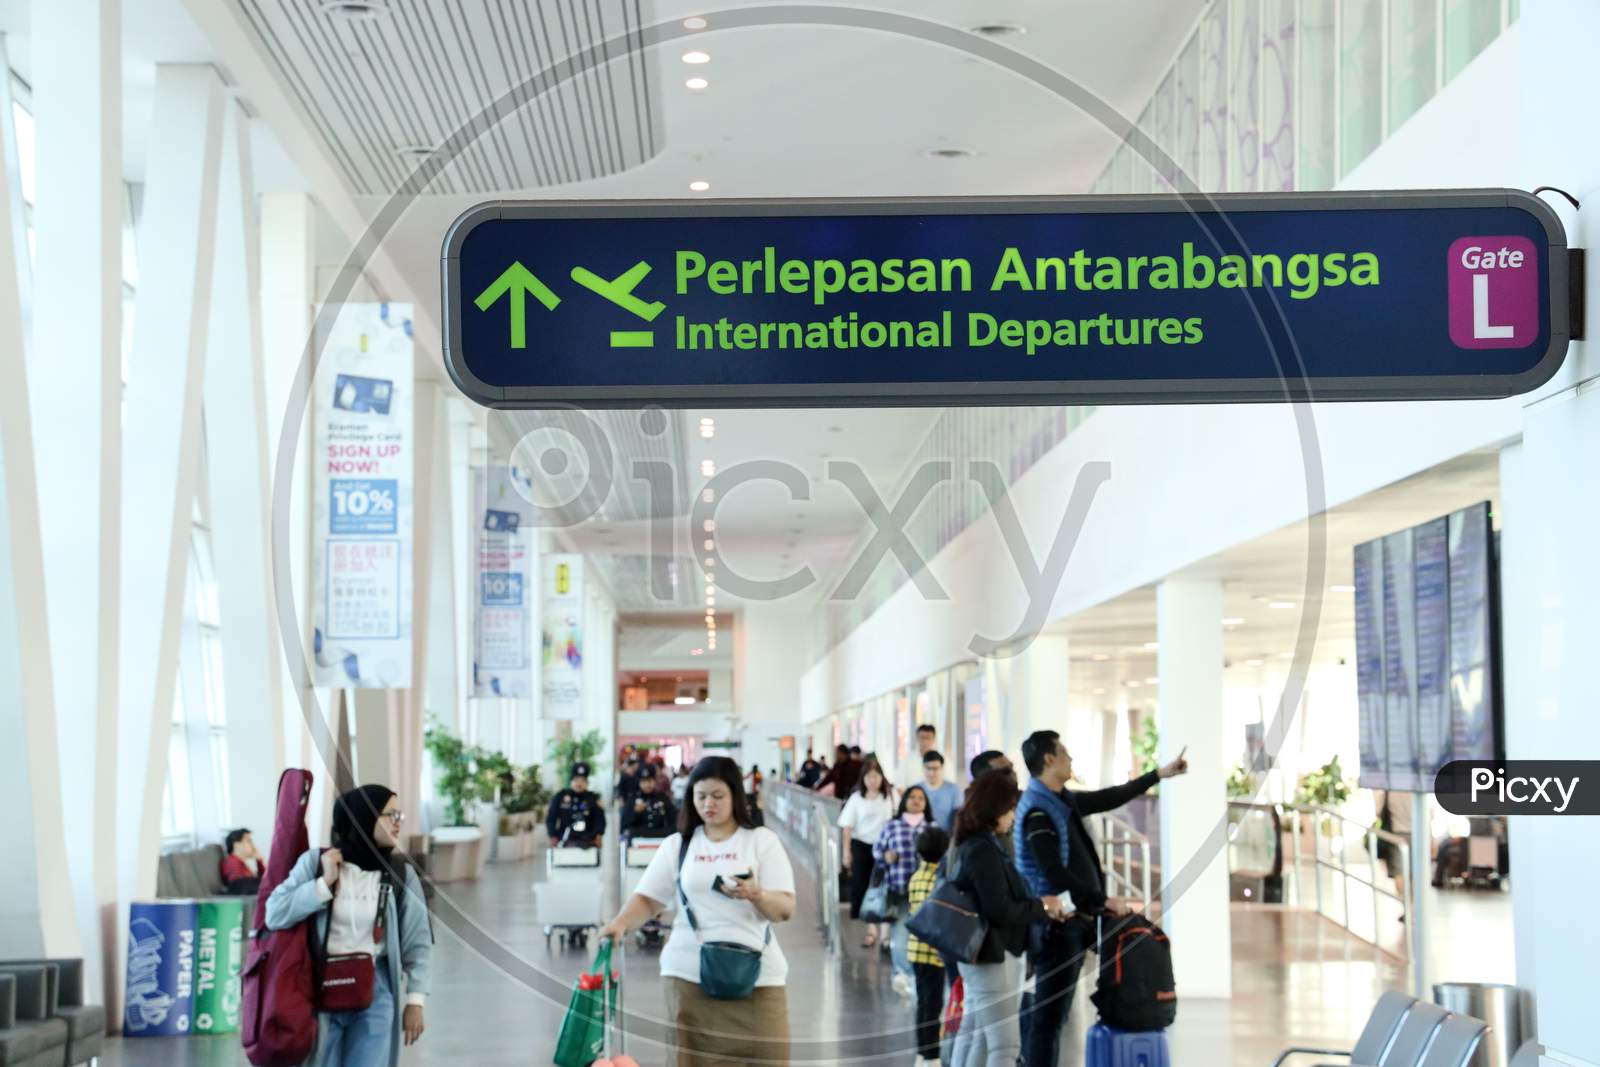 International Departures name Board in Airports